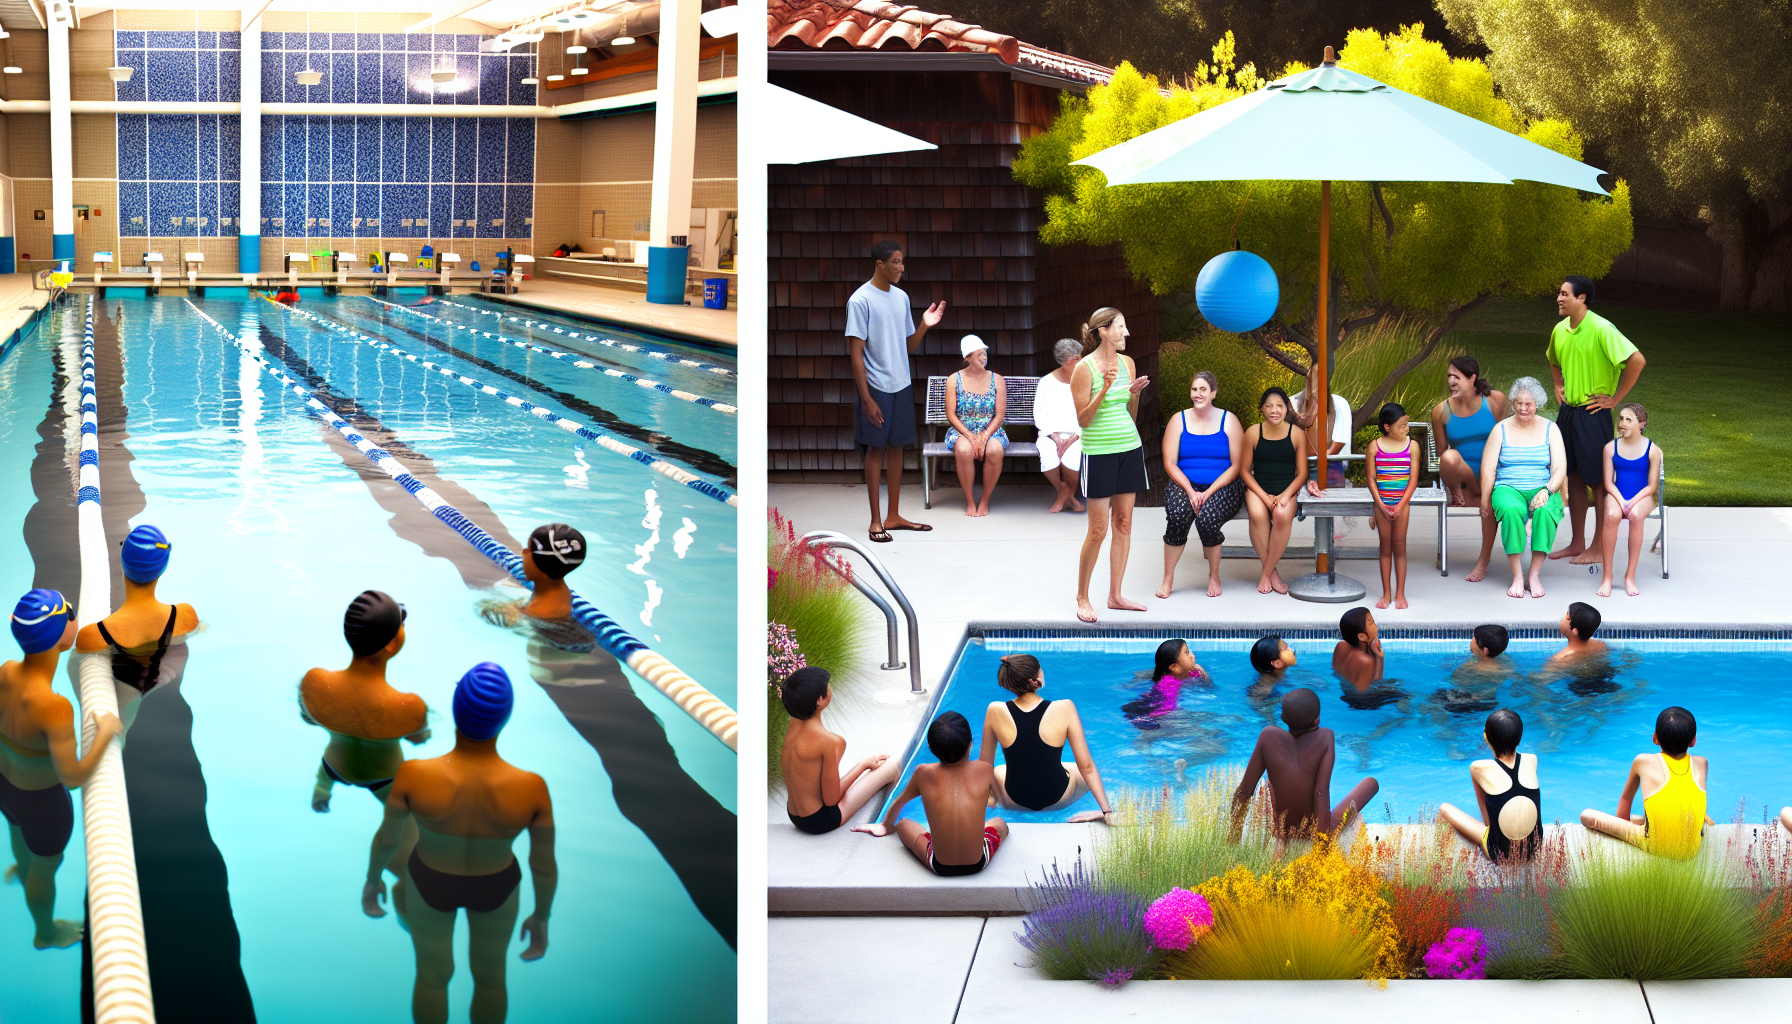 Comparison between indoor swimming pool and outdoor backyard swim lessons